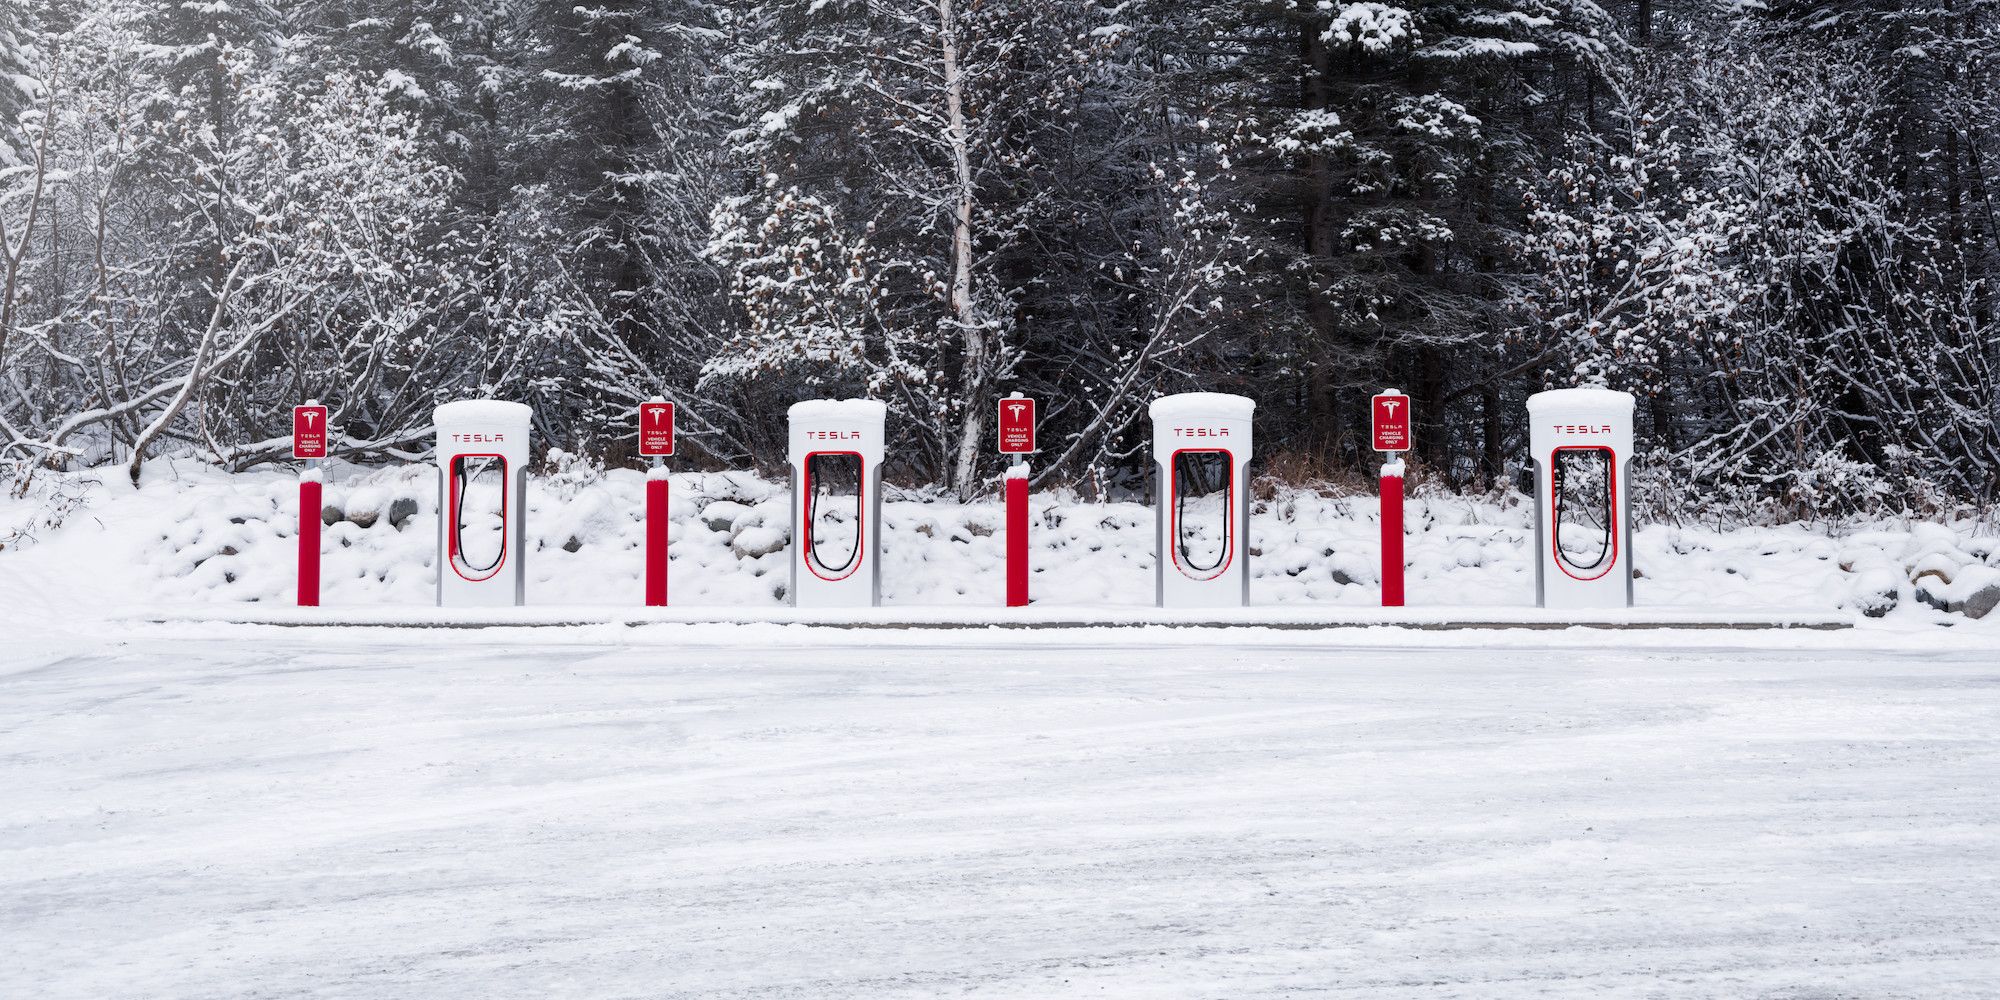 A row of Tesla Superchargers in the snow